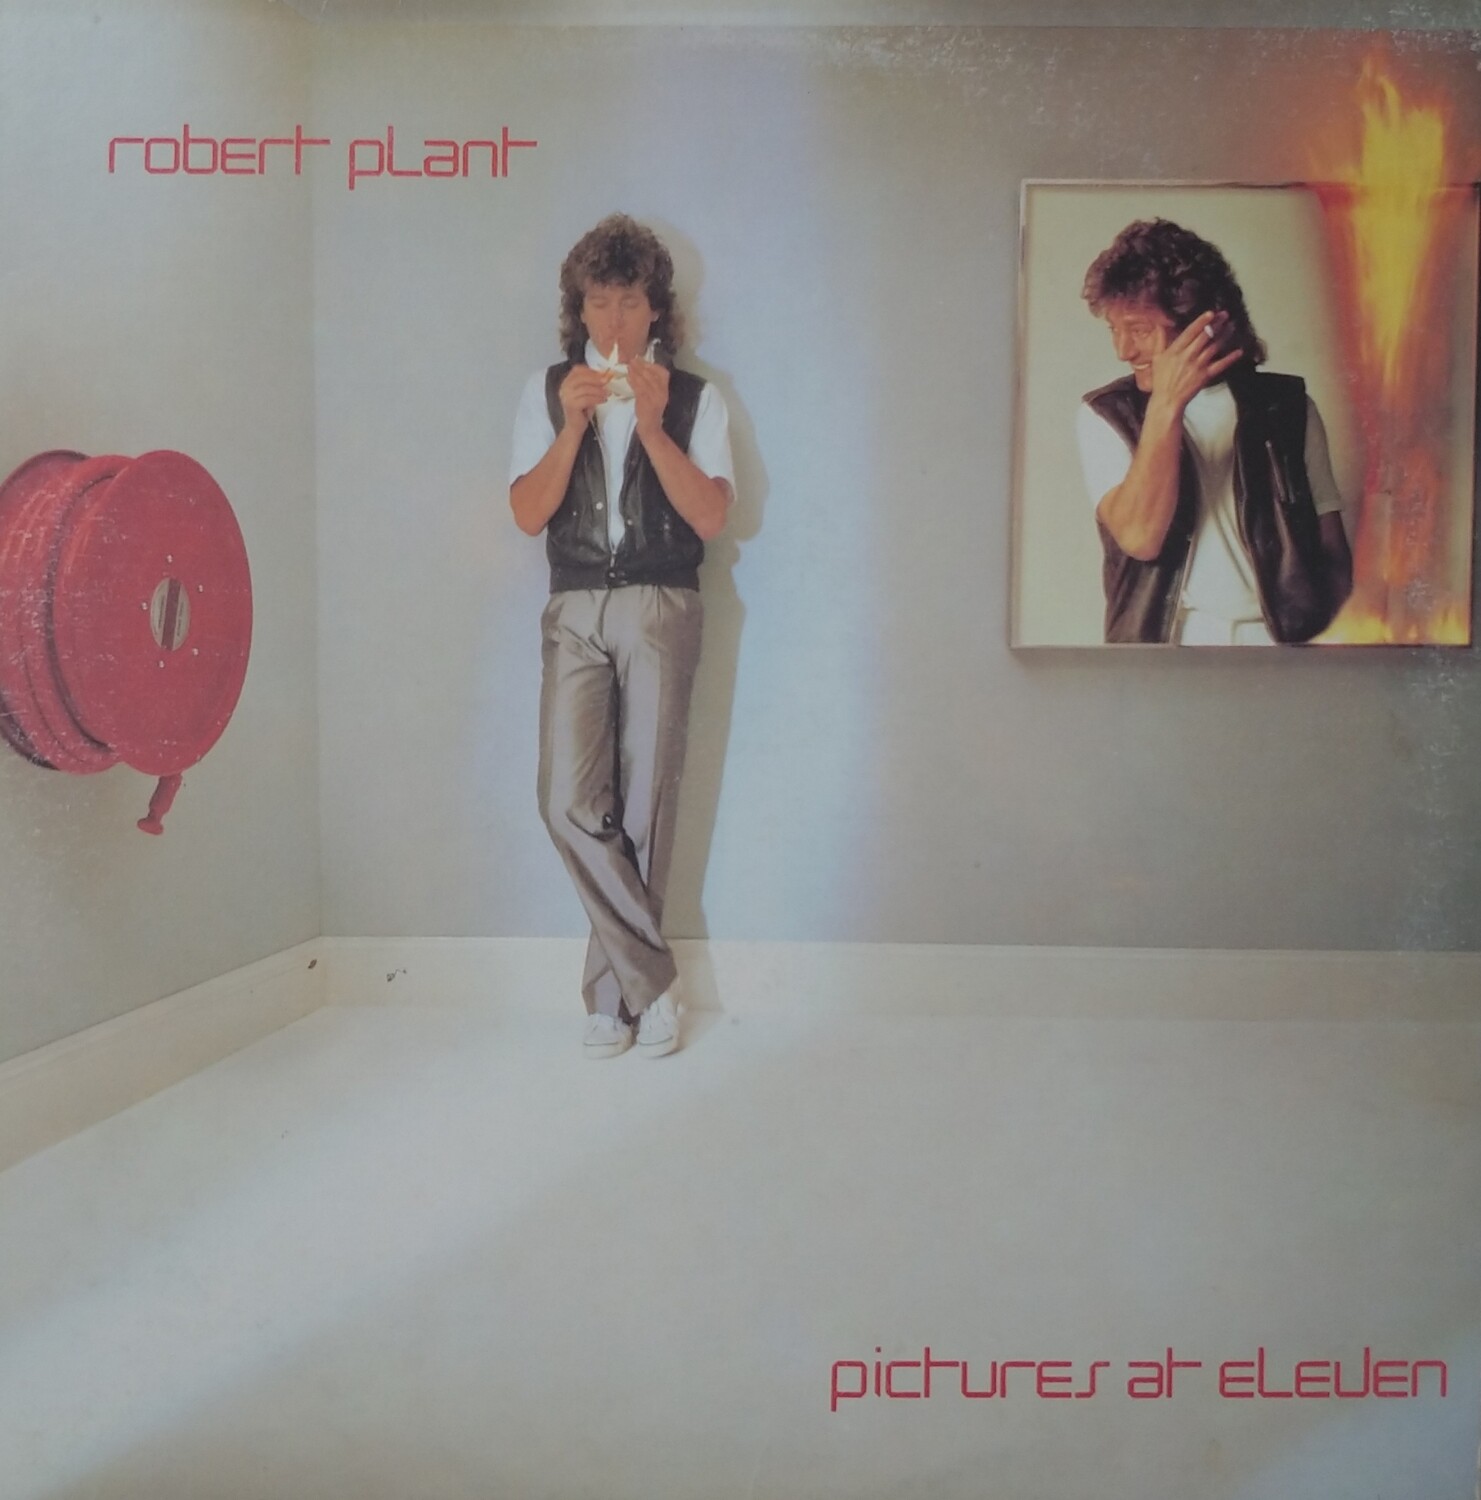 Robert Plant - Pictures at eleven